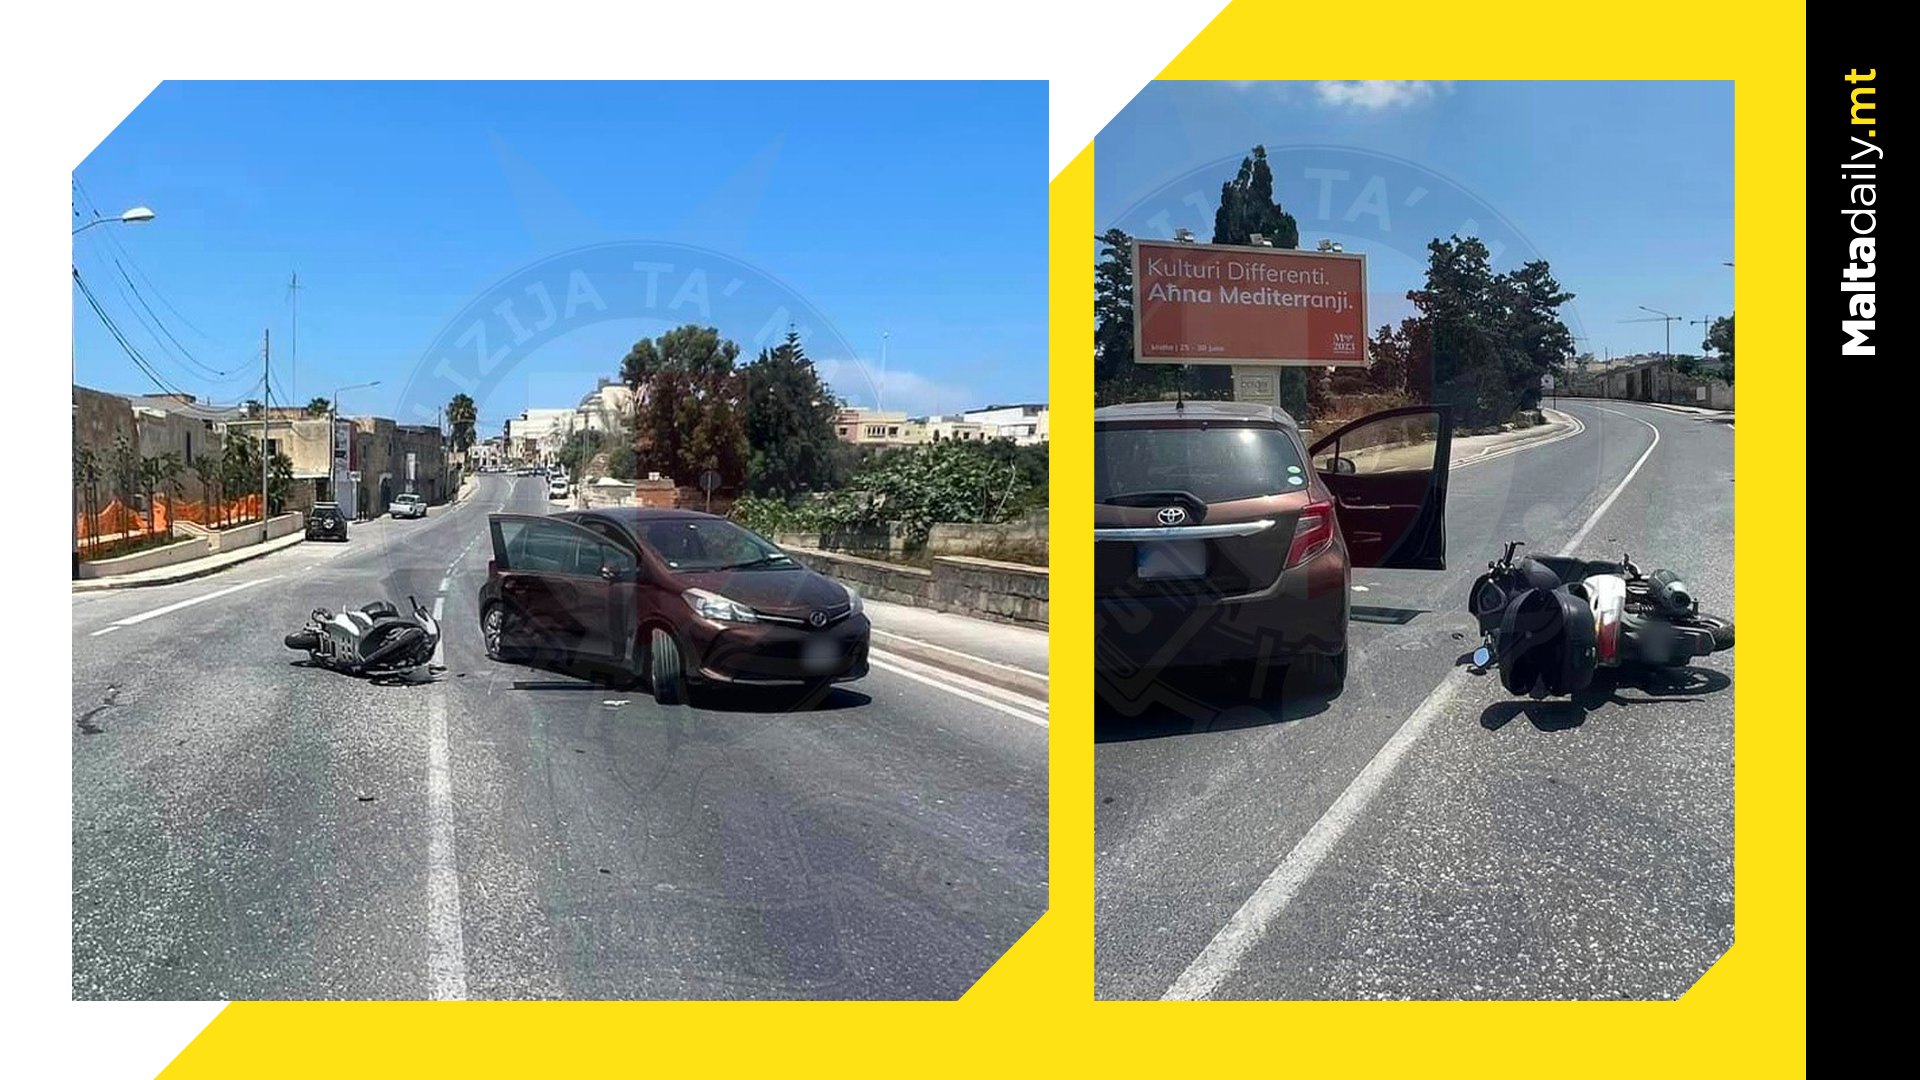 24 year old motorcyclist at risk of dying after Qormi crash